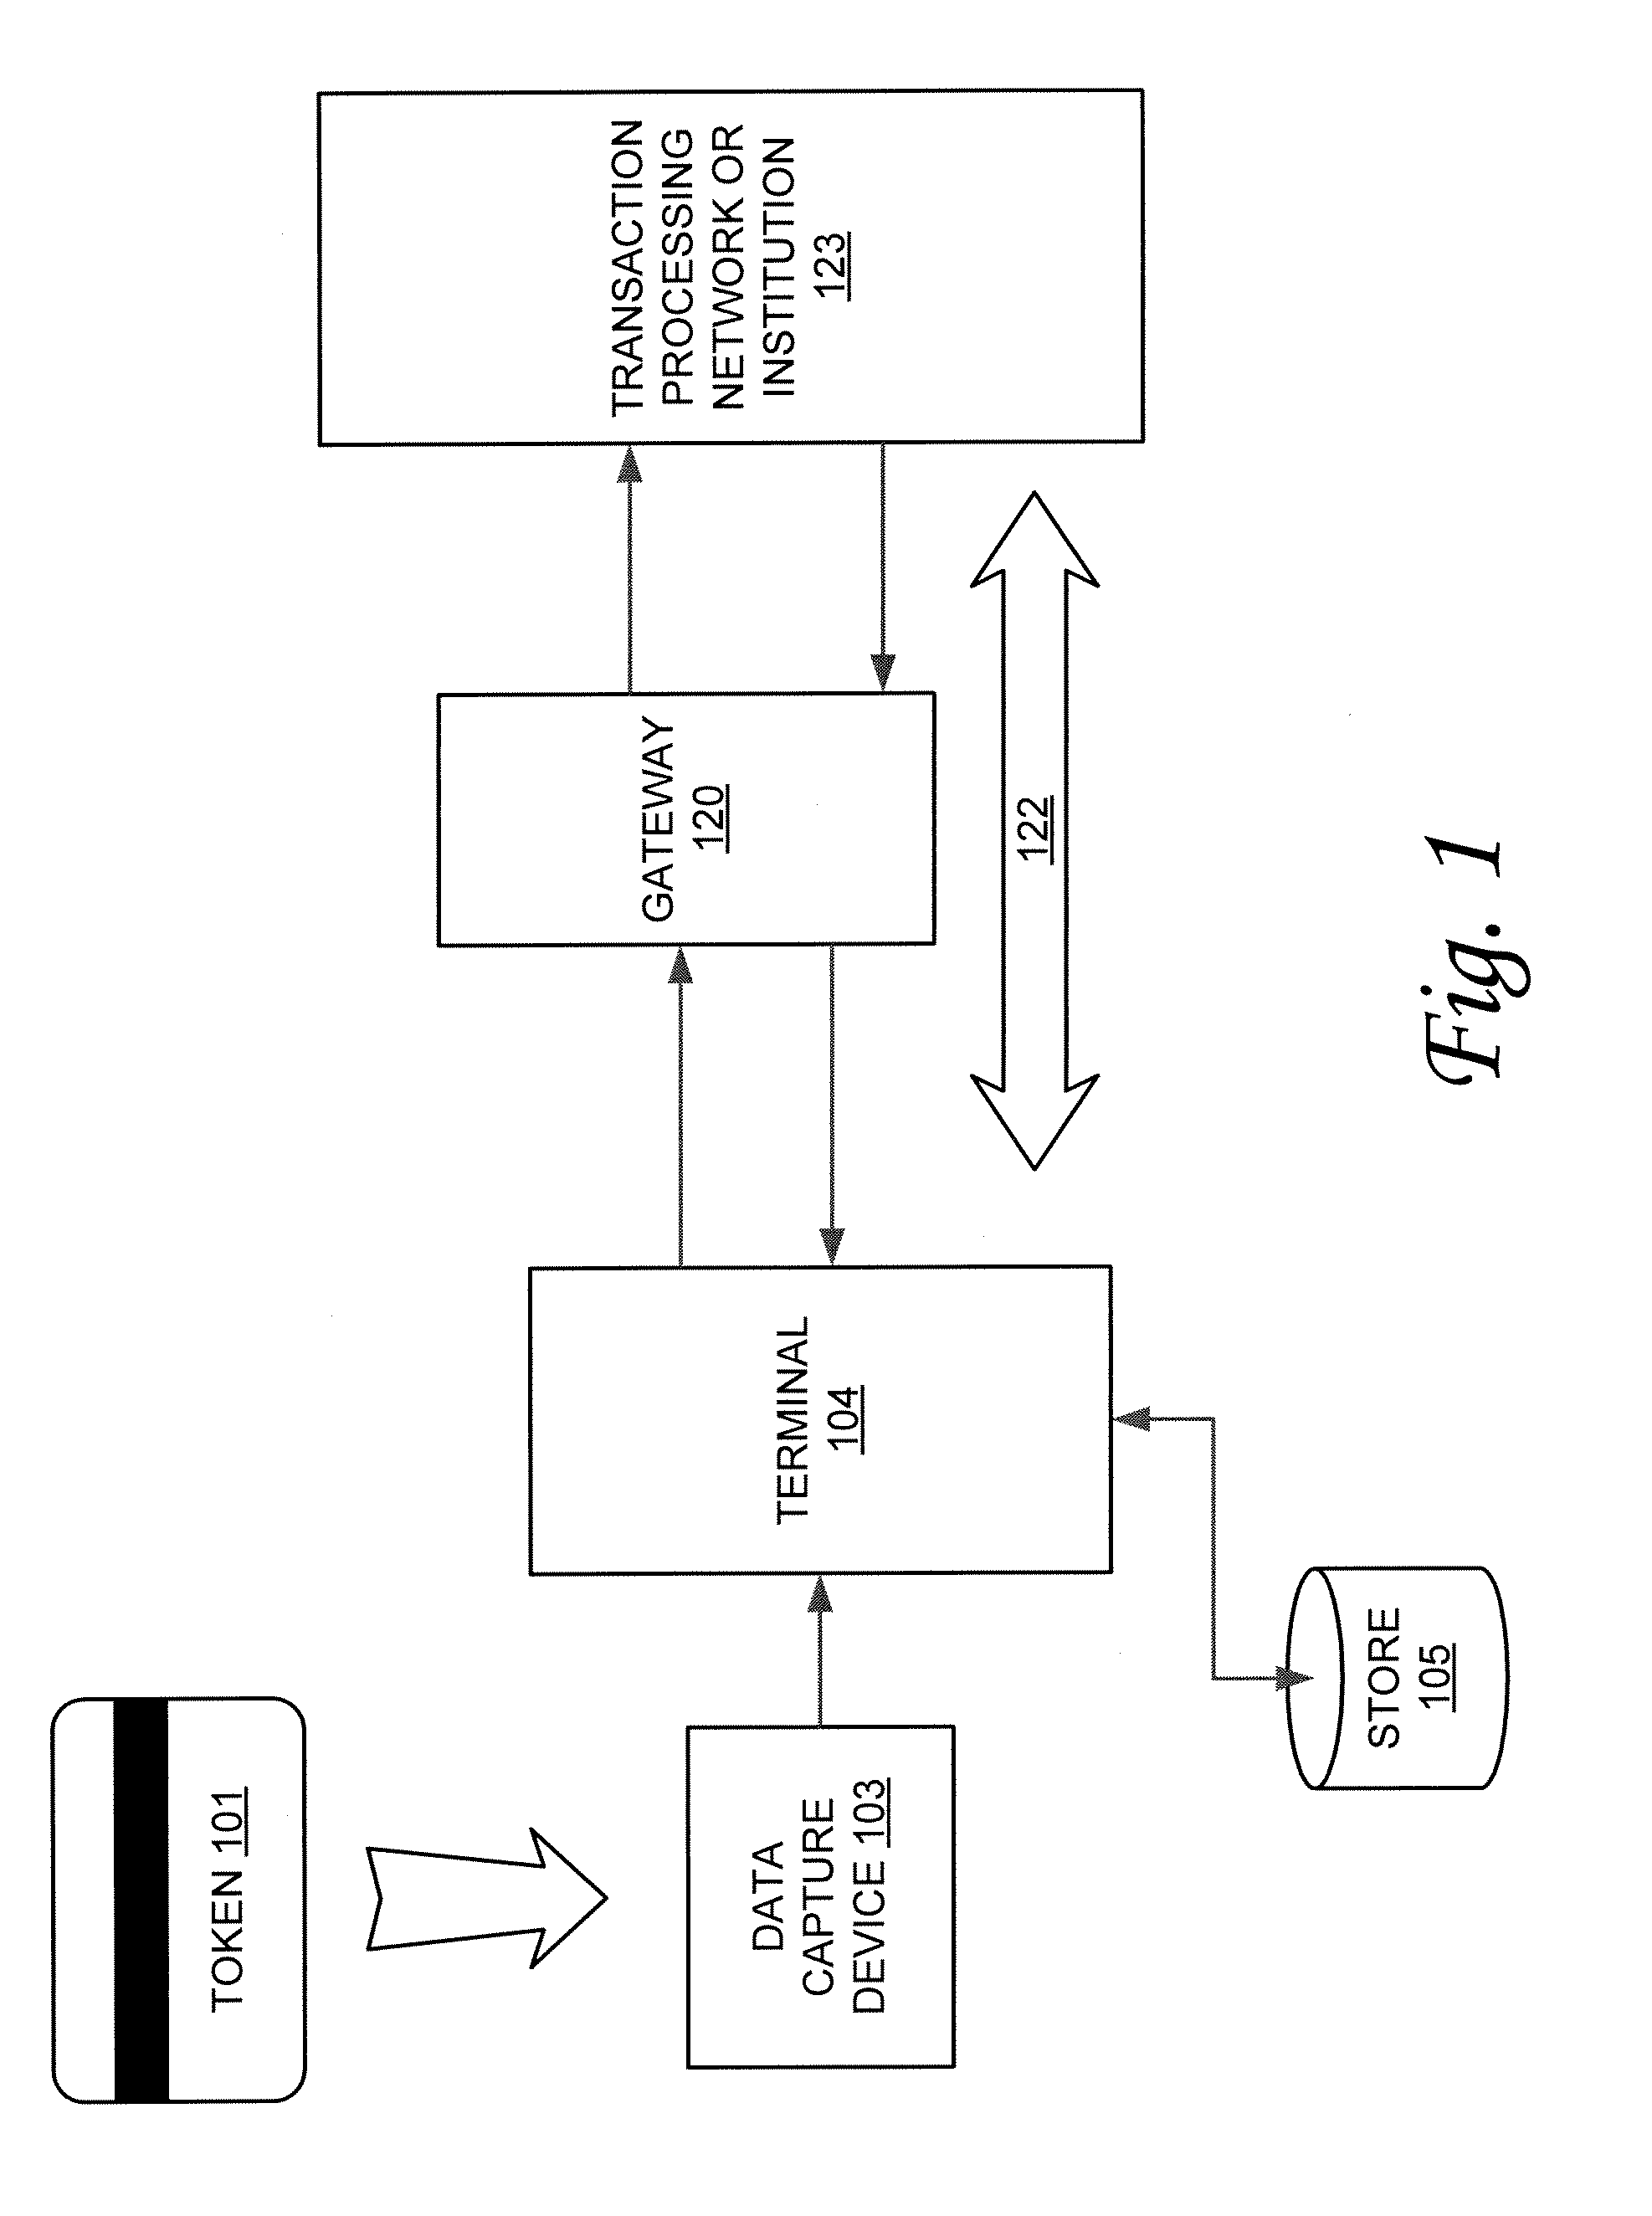 Method and system for secured transactions